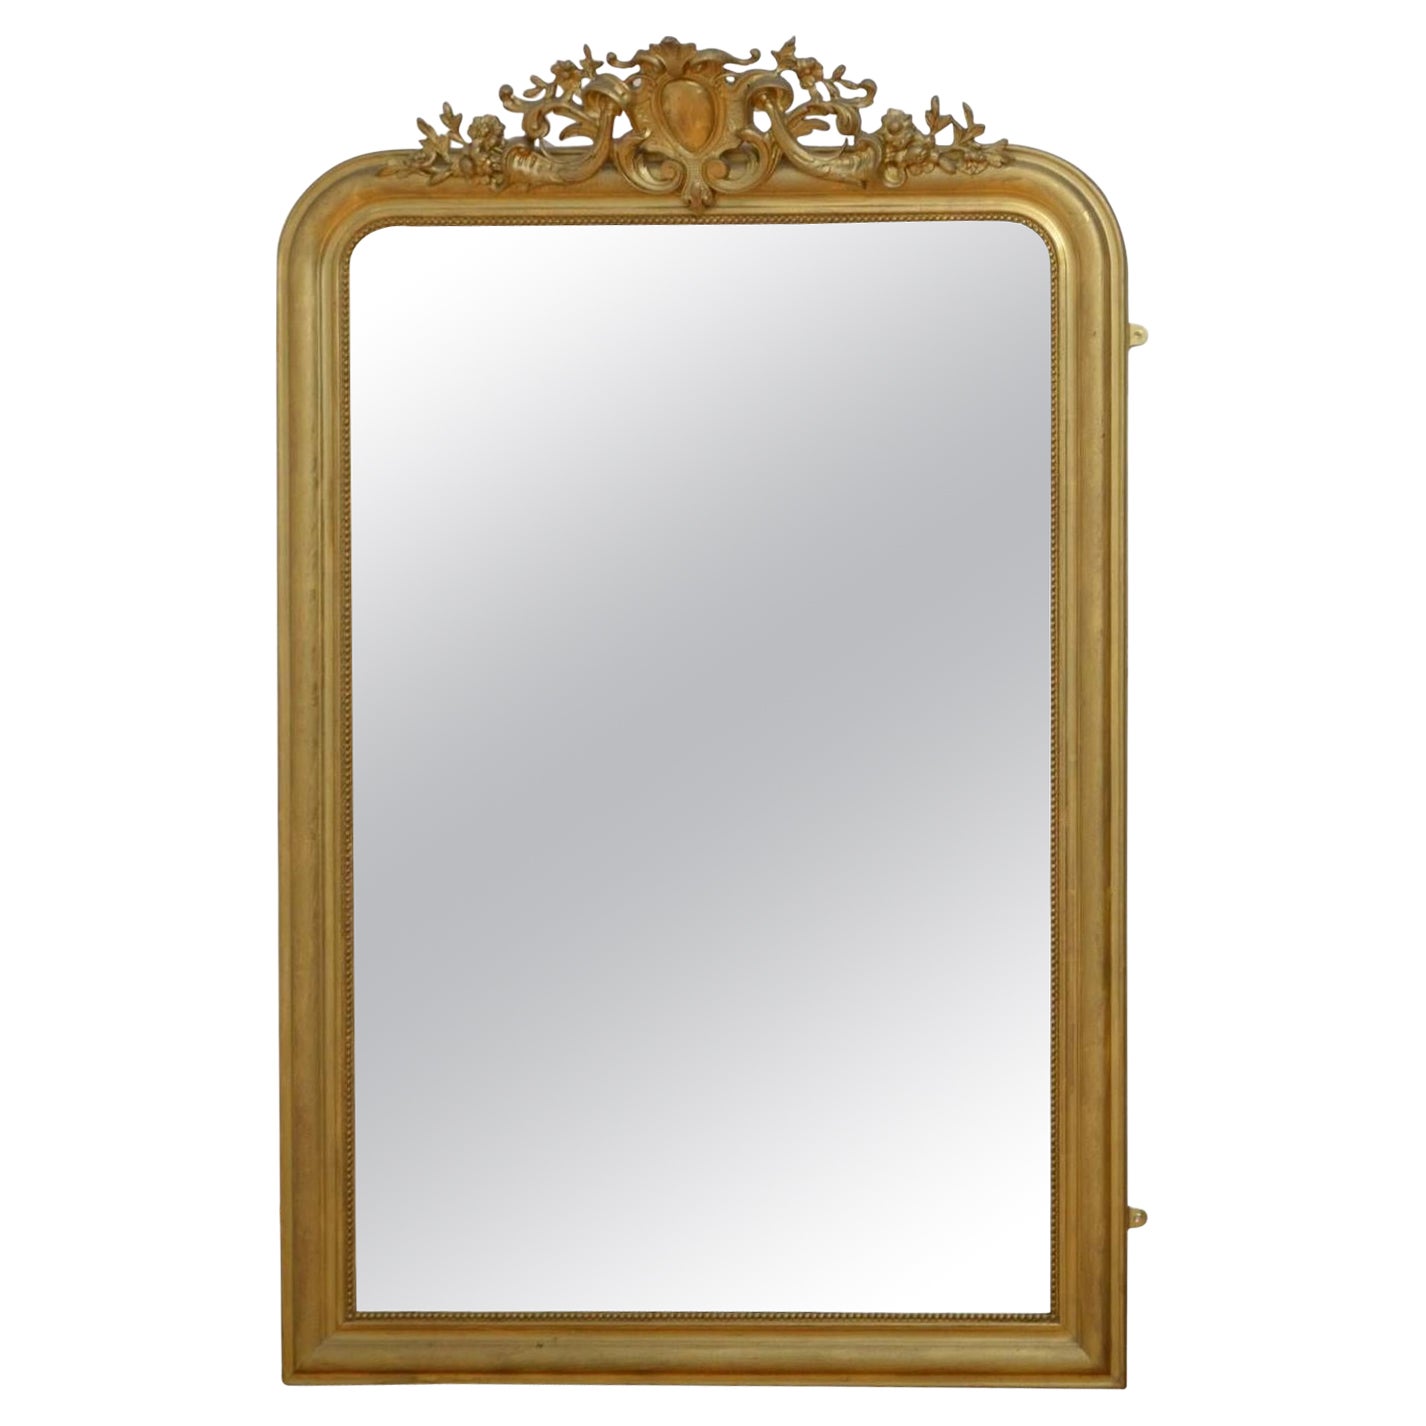 19th Century, French, Gilded Mirror